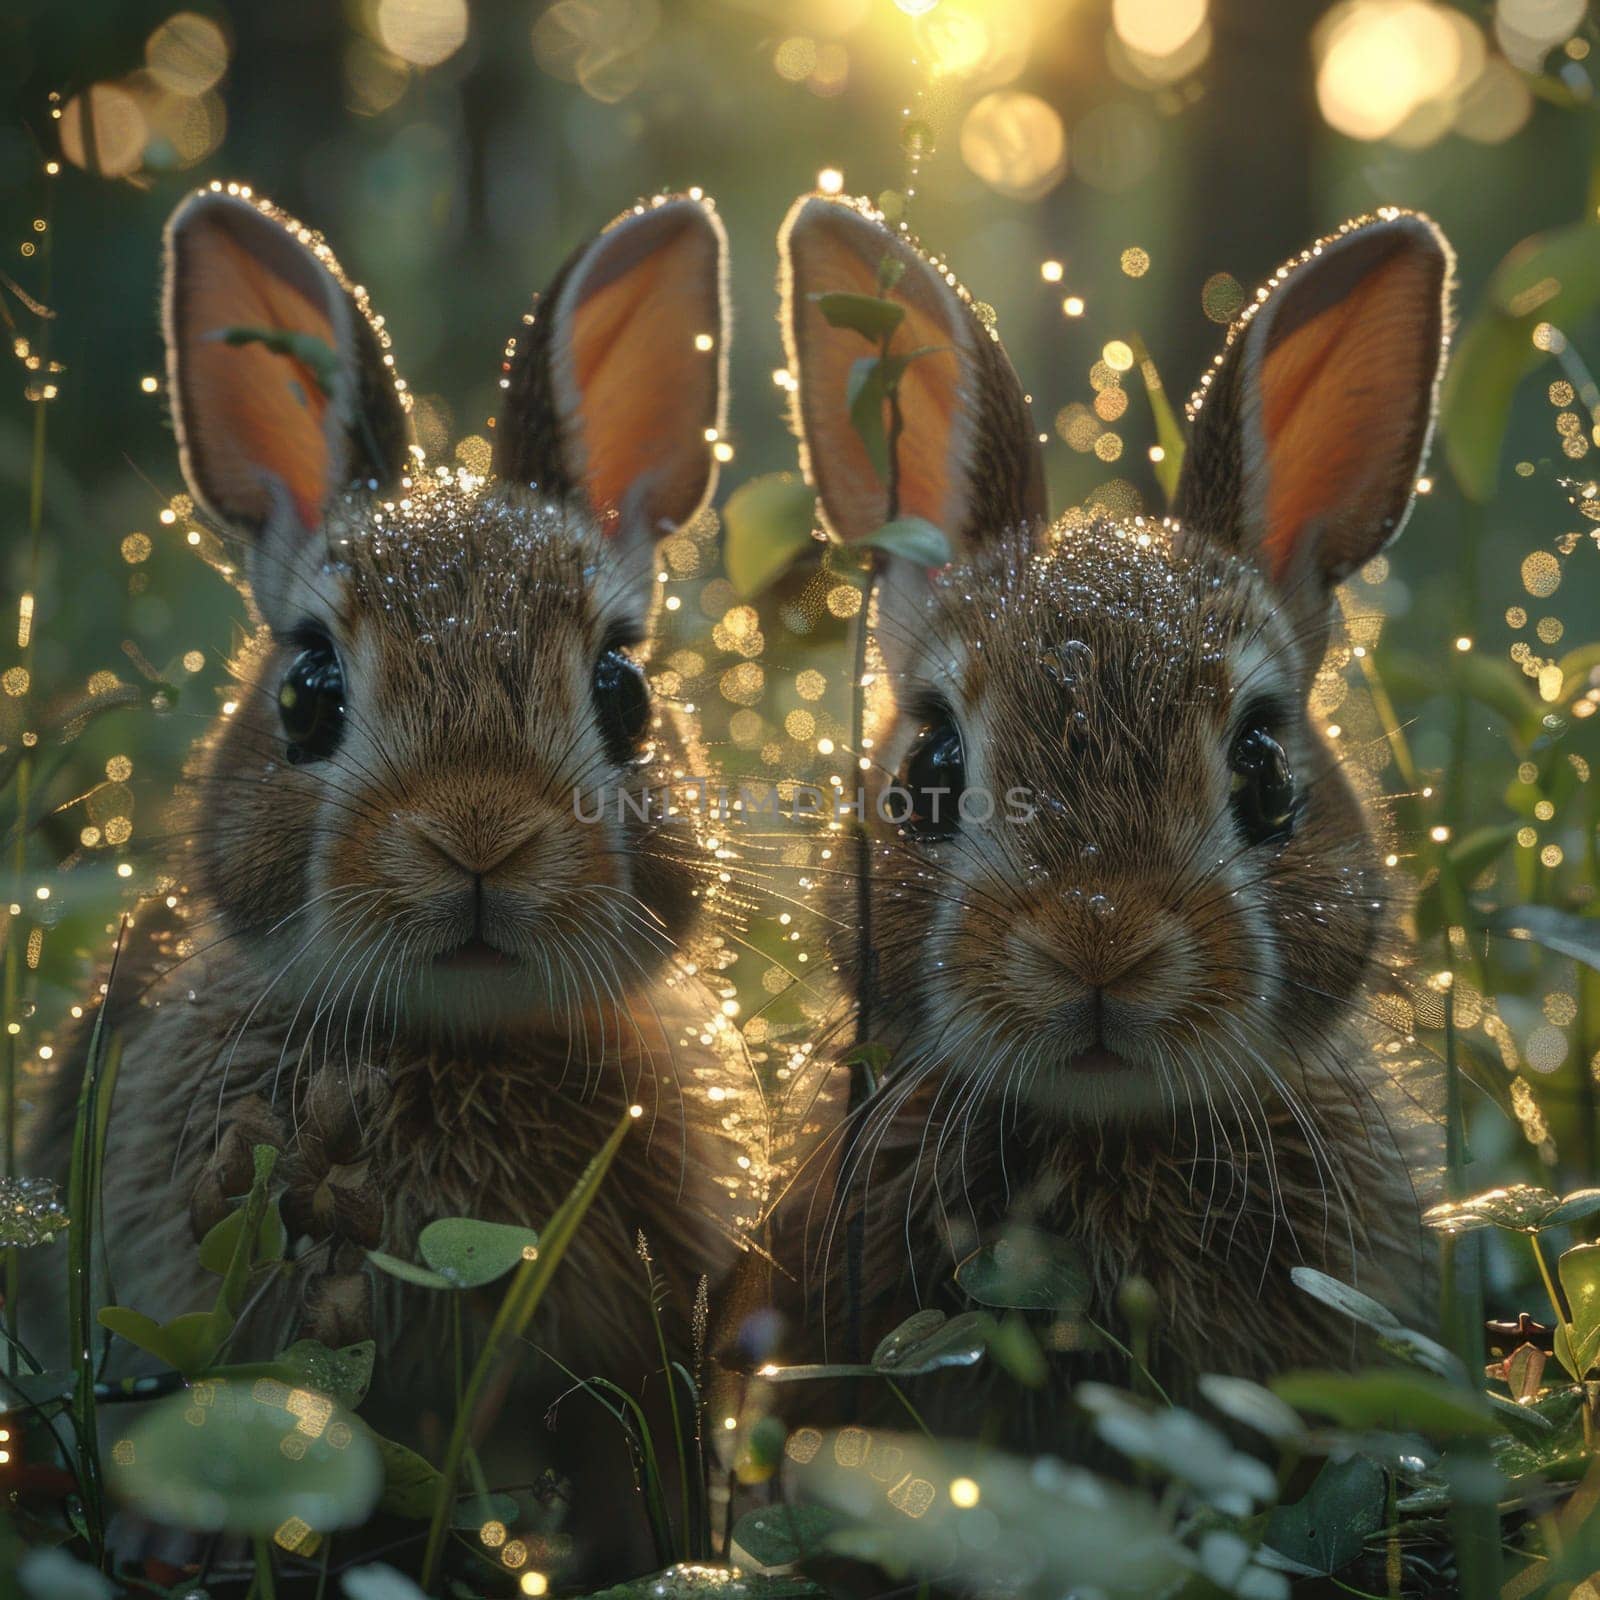 Two Rabbits Sitting in Grass by but_photo